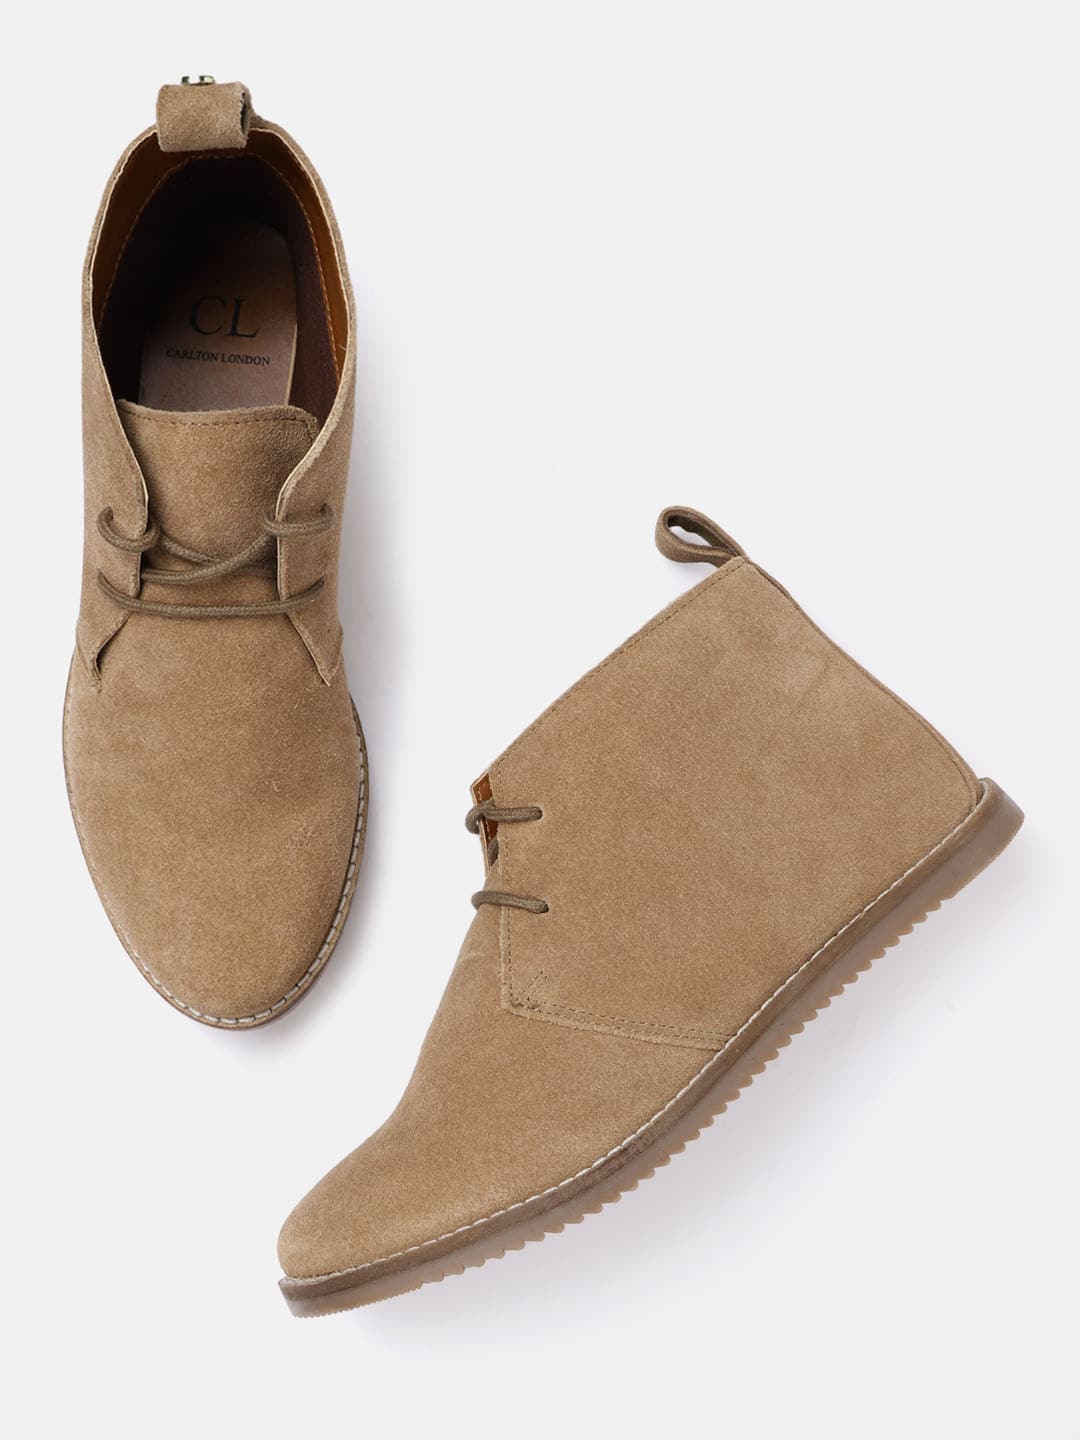 Carlton London Women Beige Solid Suede Finish Mid-Top Chukka Flat Boots Price in India